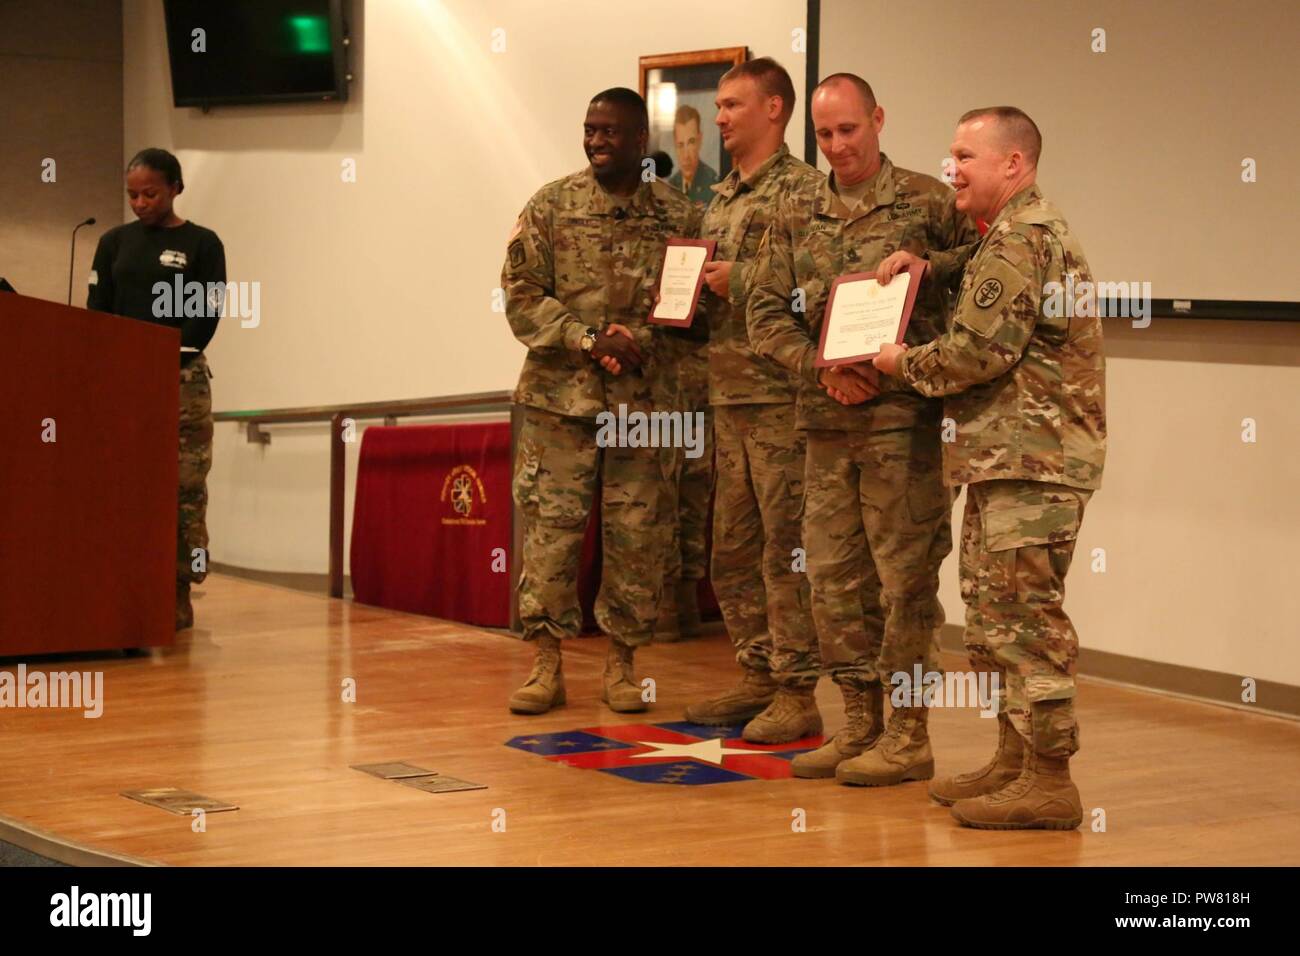 U.S. Army Sgt. 1st Class Christopher Ellis and Staff Sgt. Eric Sullivan, assigned to the Blanchfield Army Community Hospital, receive awards from Brig. Gen. R. Scott Dingle and Command Sgt. Maj. Matthew Brady during the 2017 Best Medic Competition Award Ceremony at Fort Bragg, N.C., Sept. 20, 2017. The competition tested the physical and mental toughness, as well as the technical competence, of each medic to identify the team moving forward to represent the region at the next level of the competition. Stock Photo